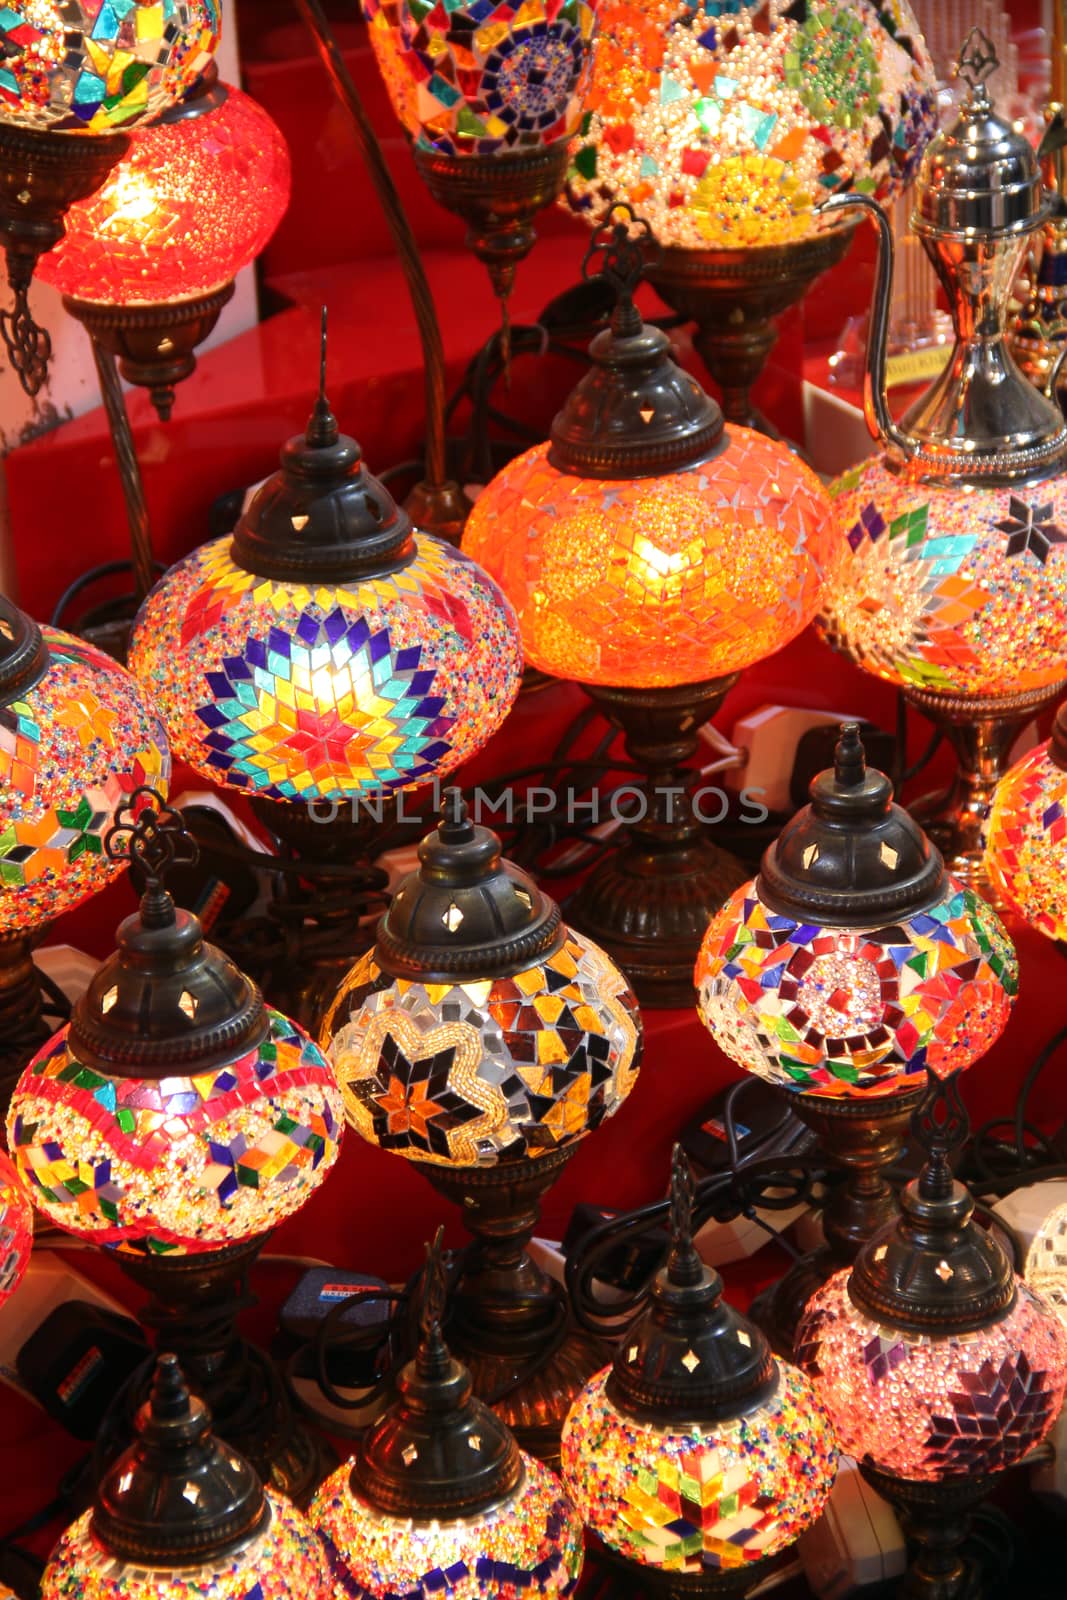 Beautiful traditional lamps hand painted painted with bright colors in traditional Arabic design.